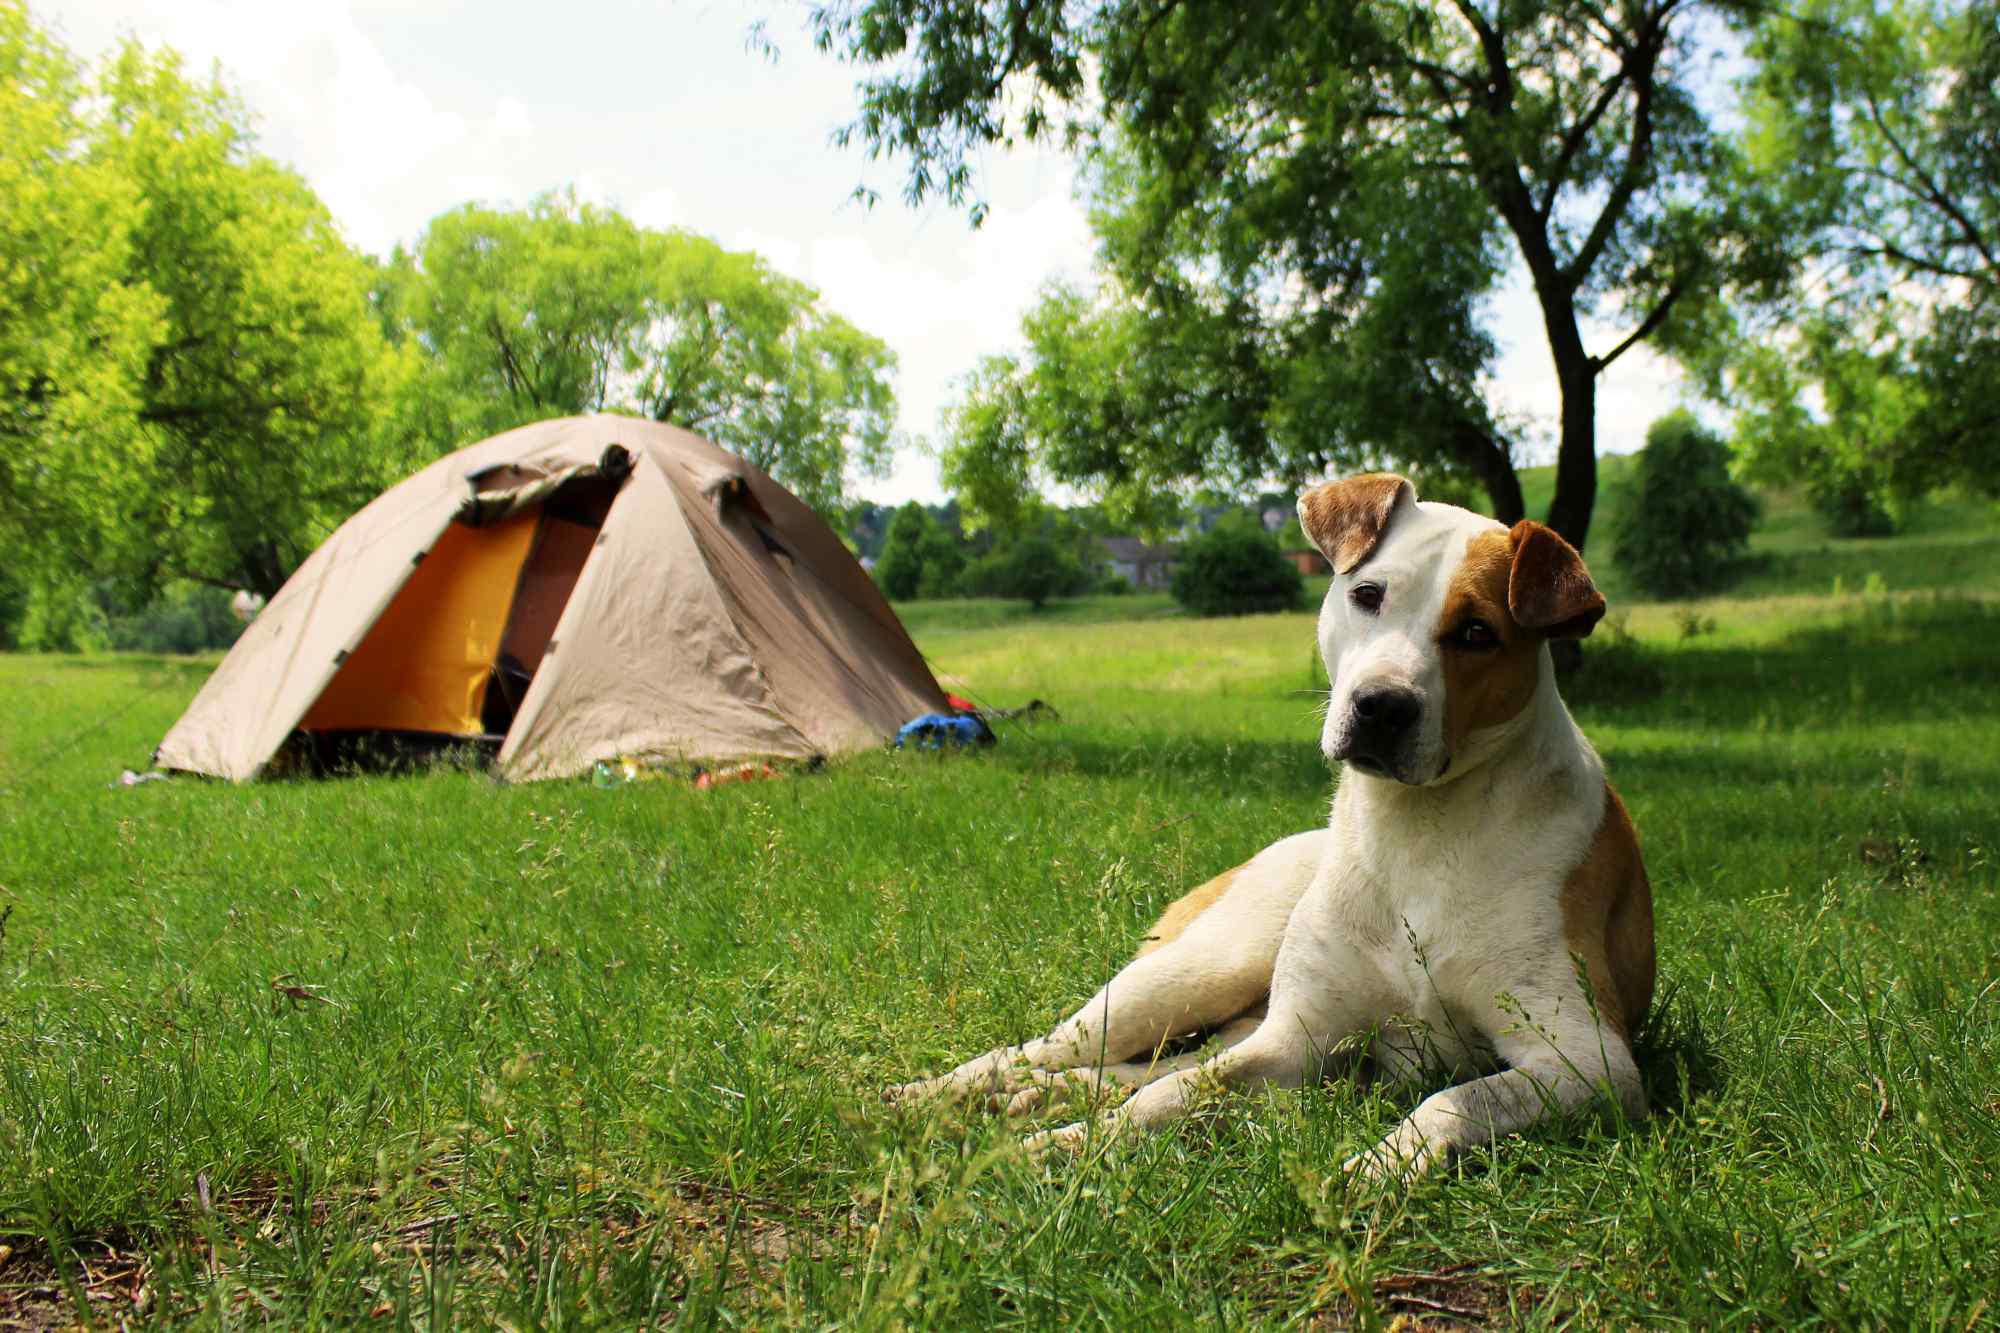 Dog lying on the grass near the tents